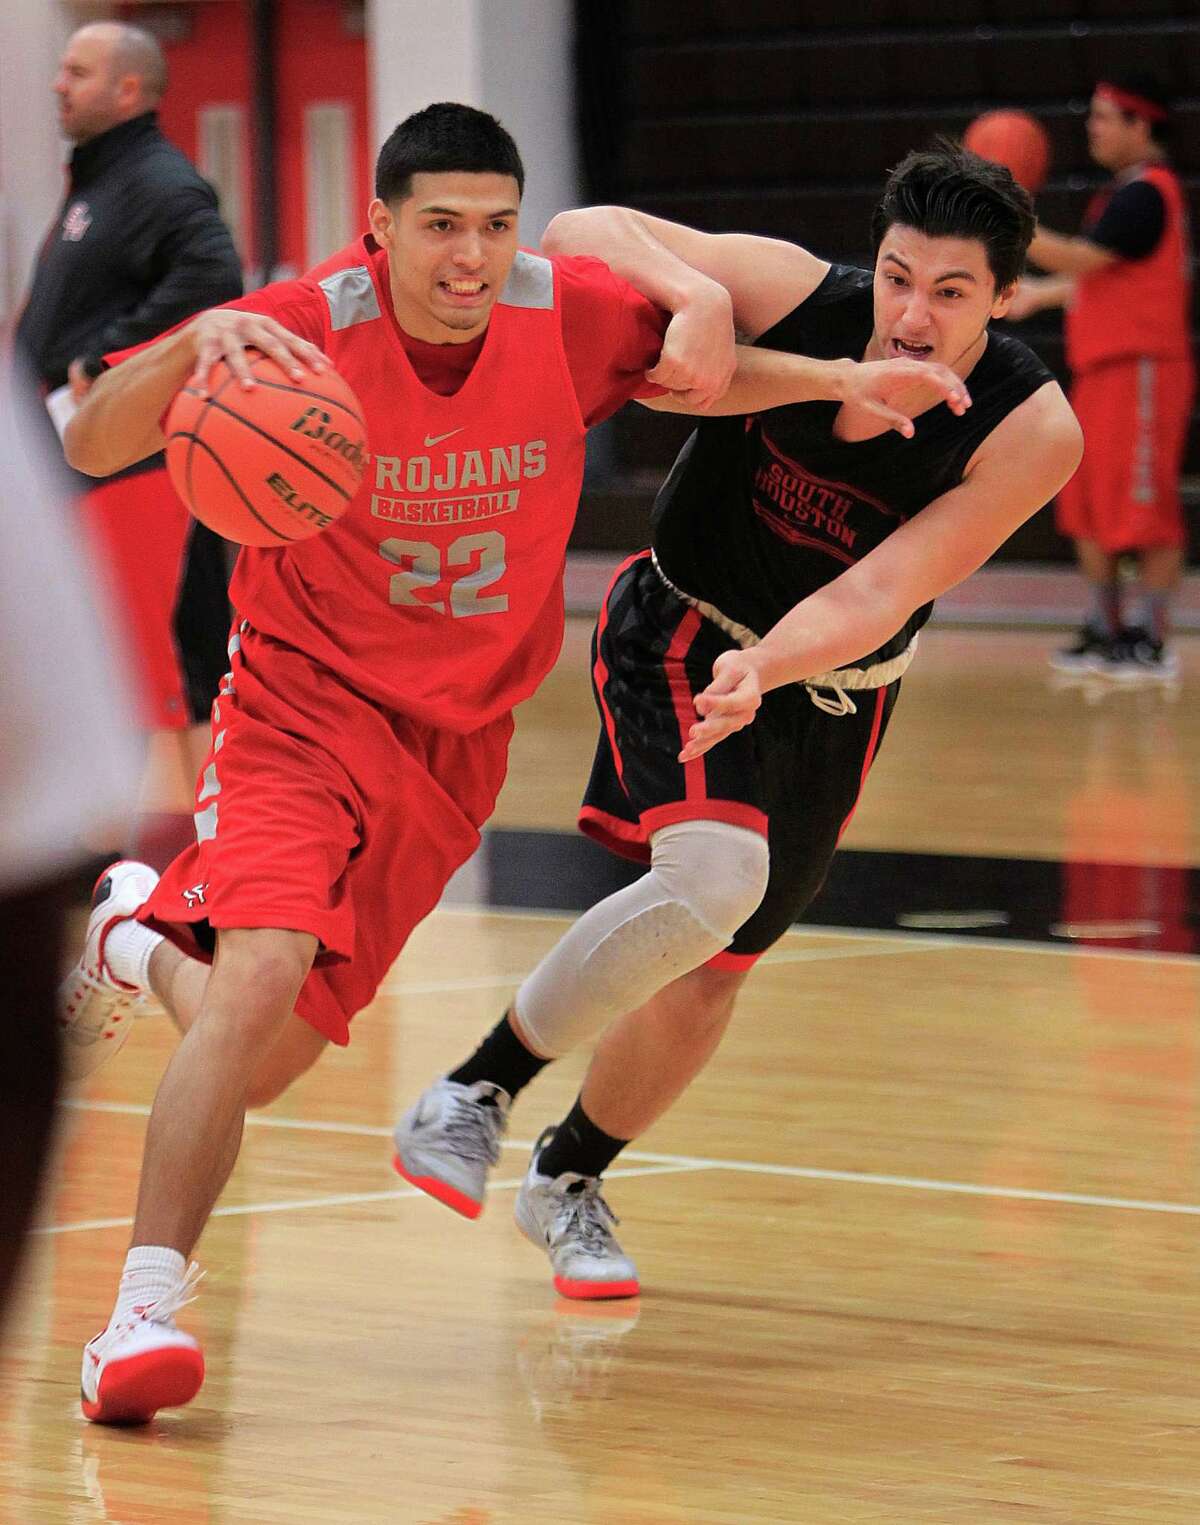 Nick Hernandez (left) drives during practice with the South Houston High School boys basketball team, Thursday, Feb. 11, 2016, in Houston. Hernandez, a senior, has been a critical part of the Trojans' success. They have won 21 of their last 22 games, and they will play Friday night for the District 22-6A championship.